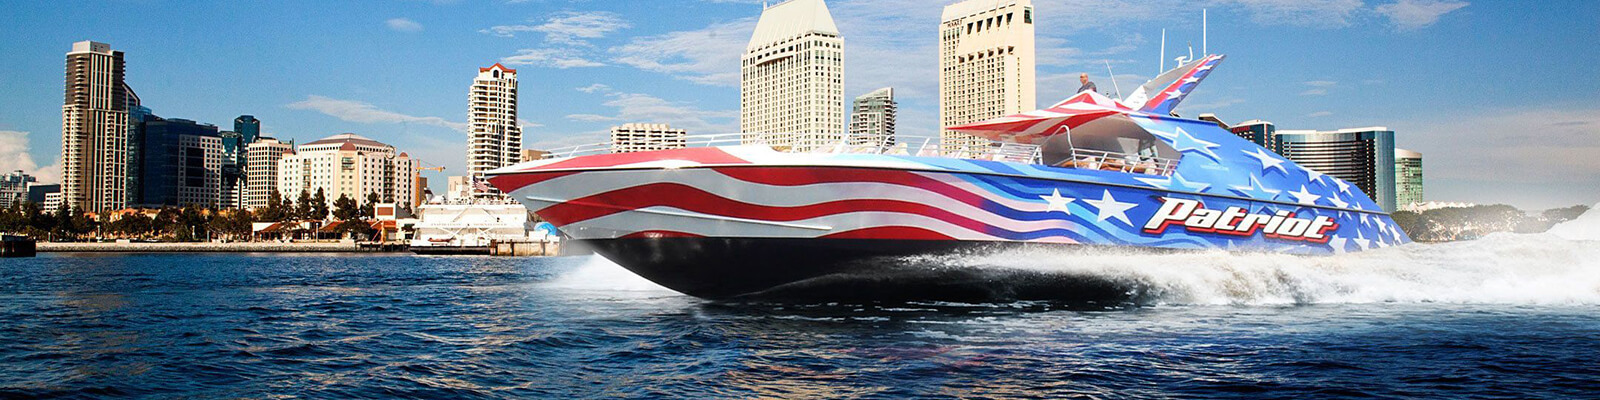 Patriot Jet Boat Ride Coupons